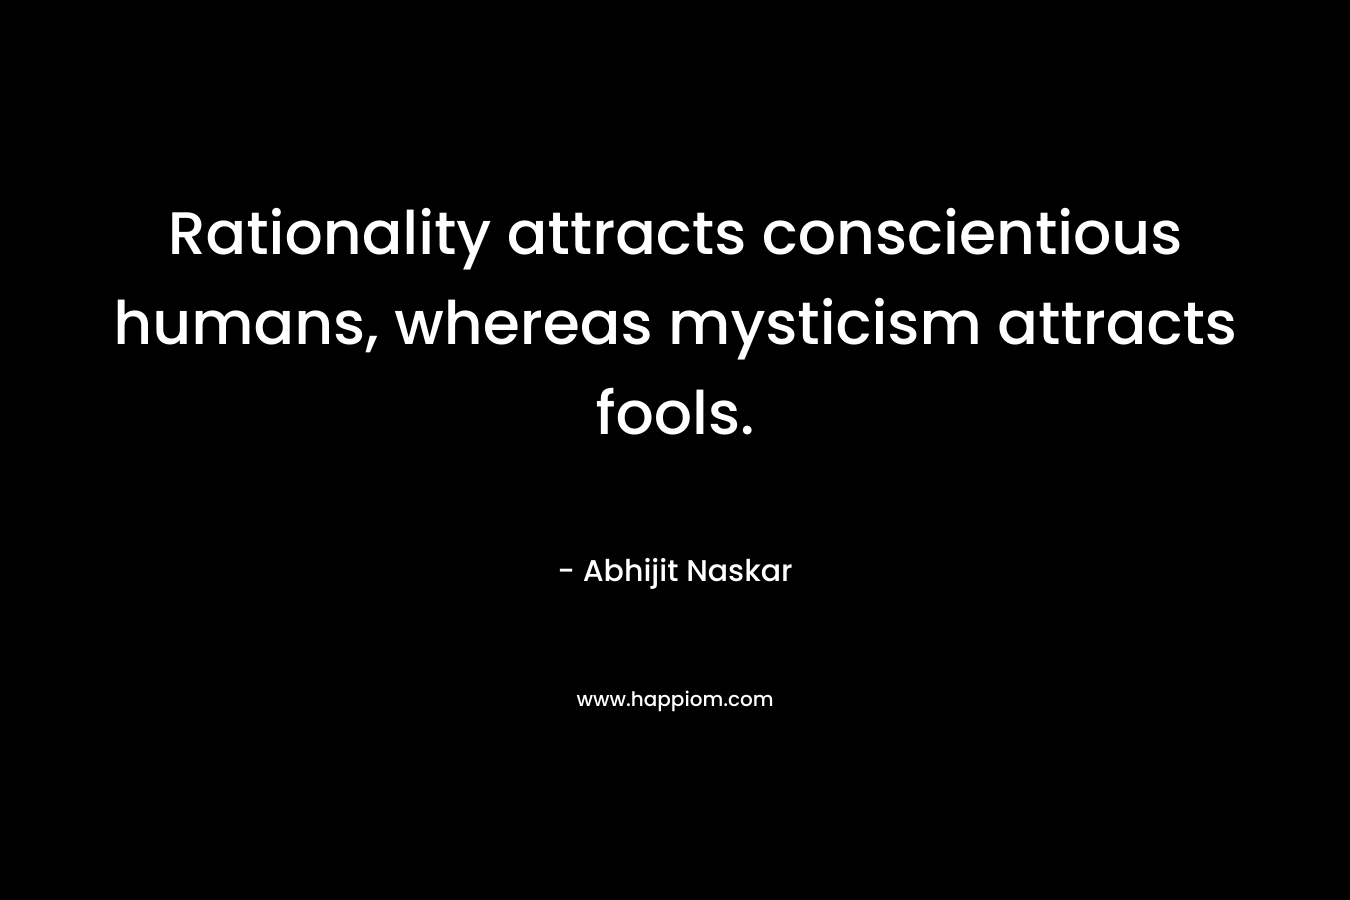 Rationality attracts conscientious humans, whereas mysticism attracts fools.